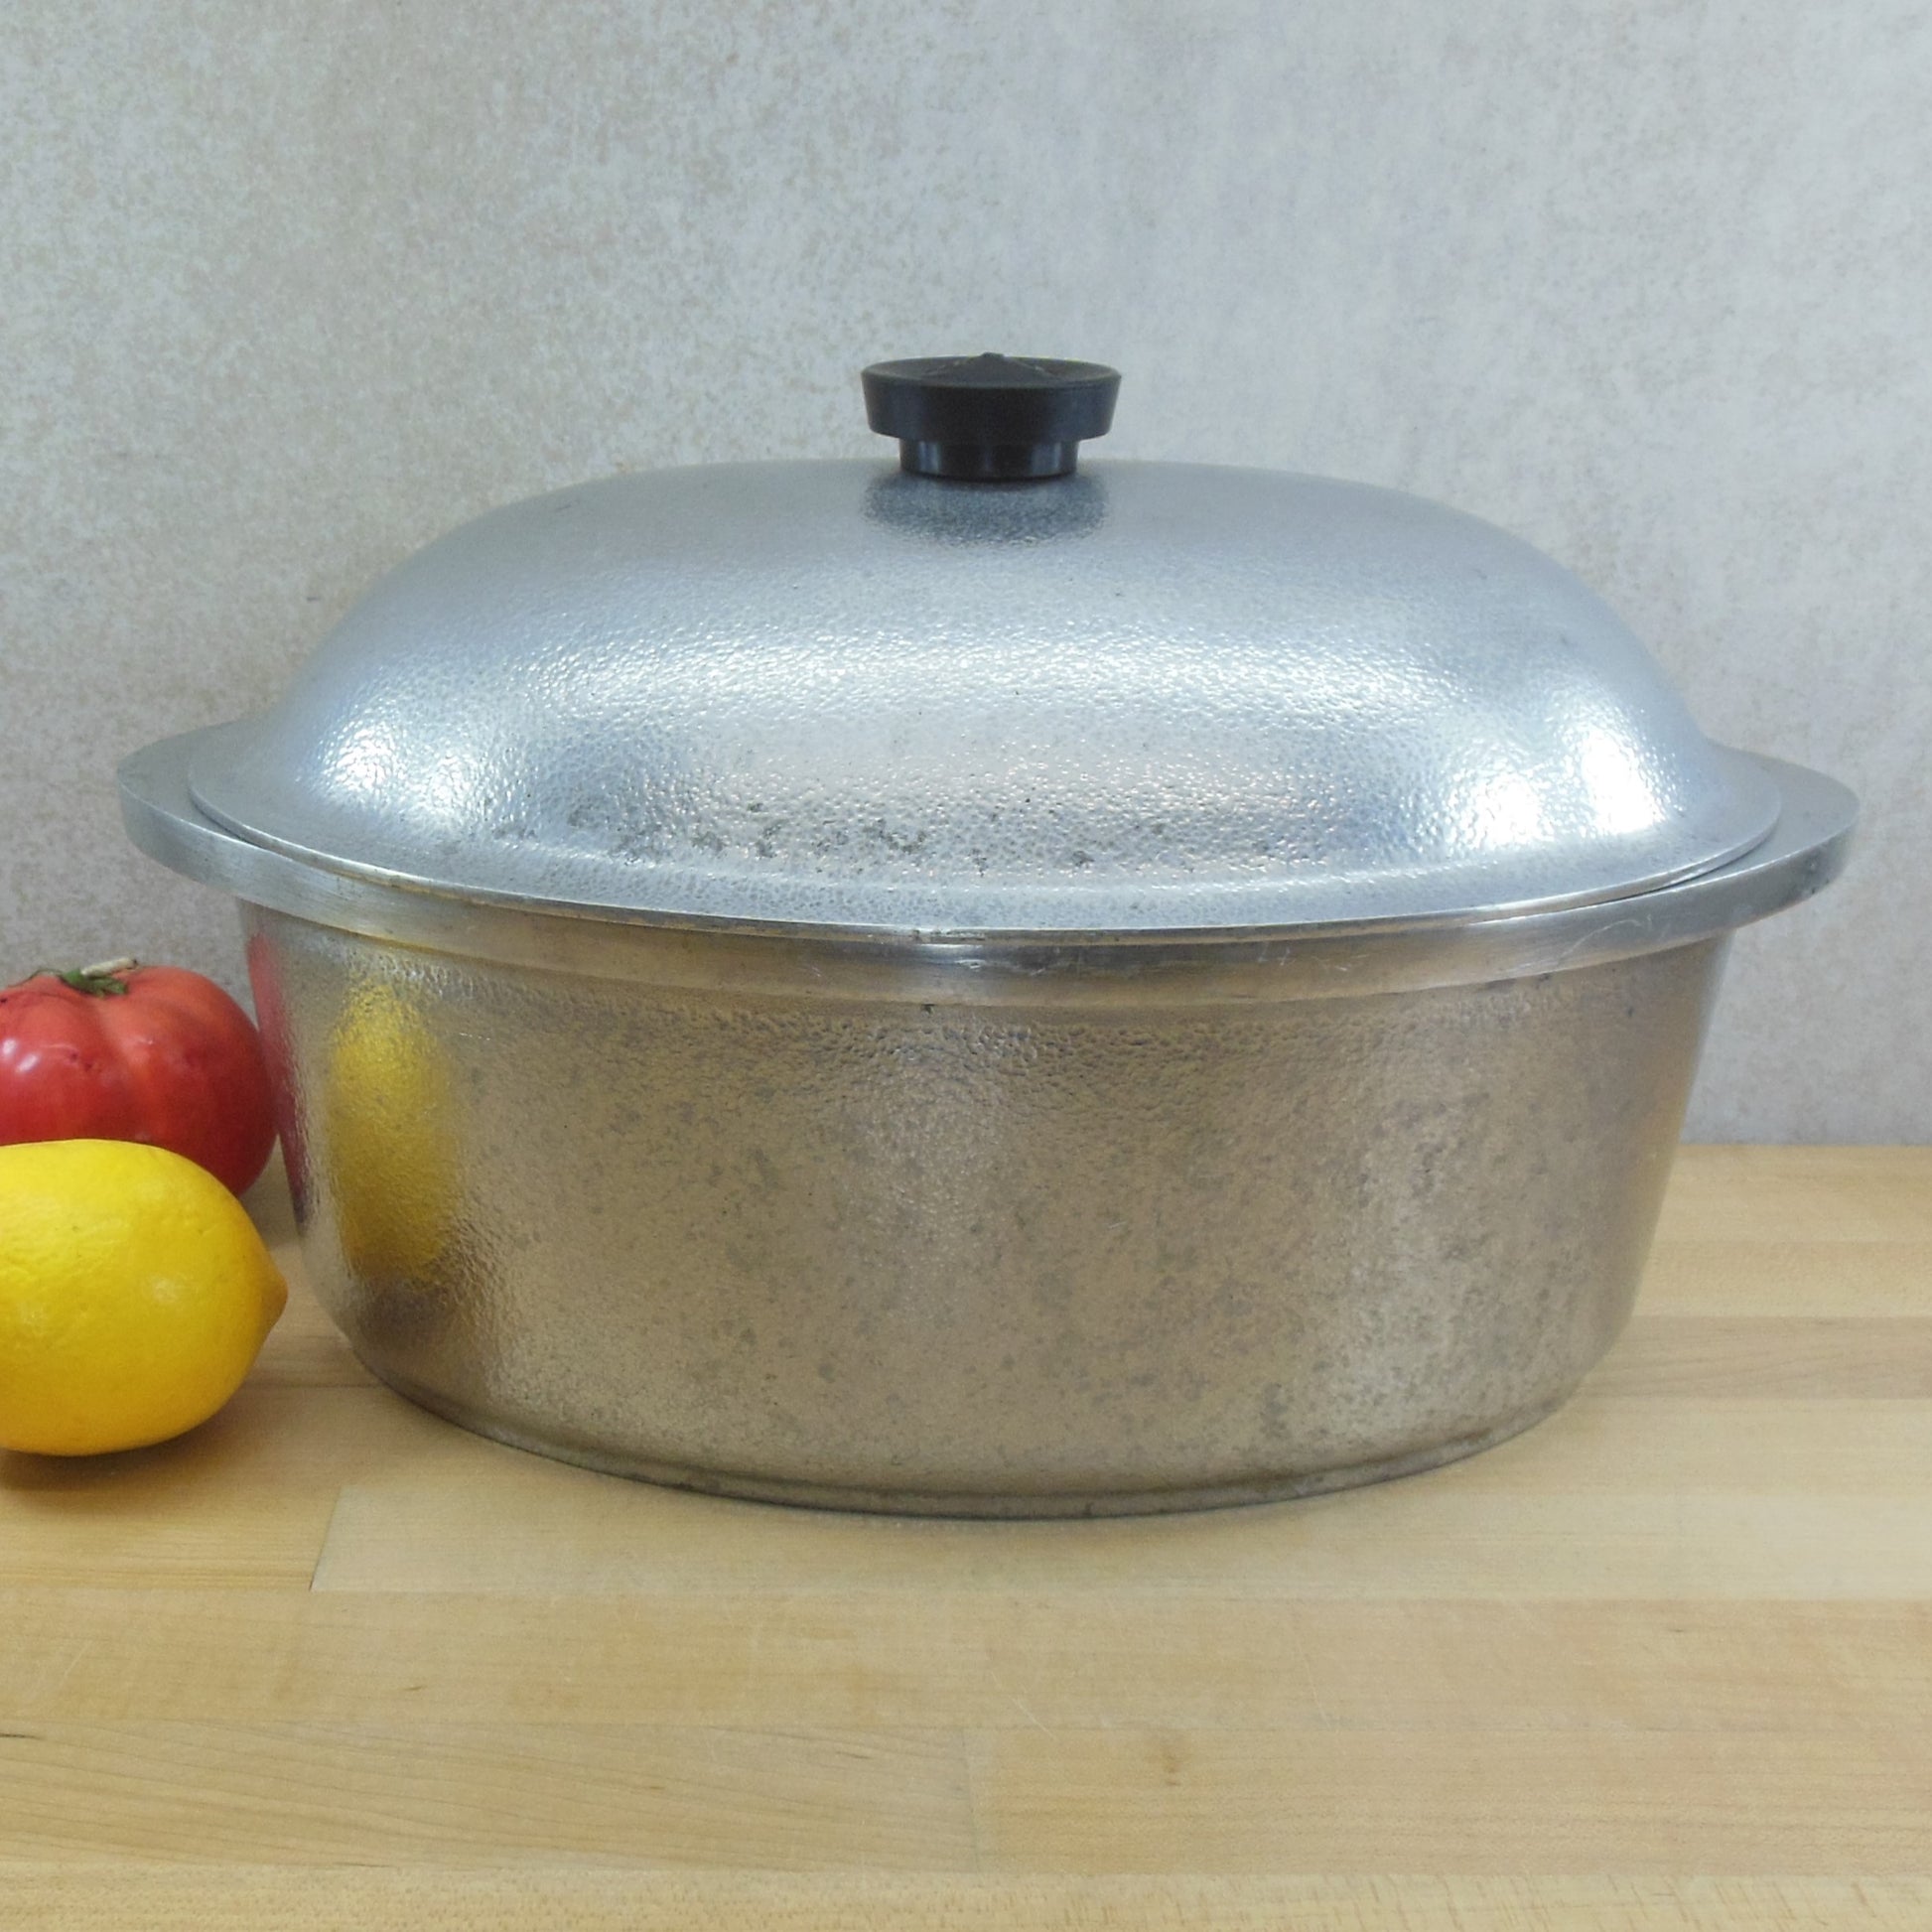 Vintage Cast Aluminum Heavy Oval Roaster Dutch Oven with Dome Lid